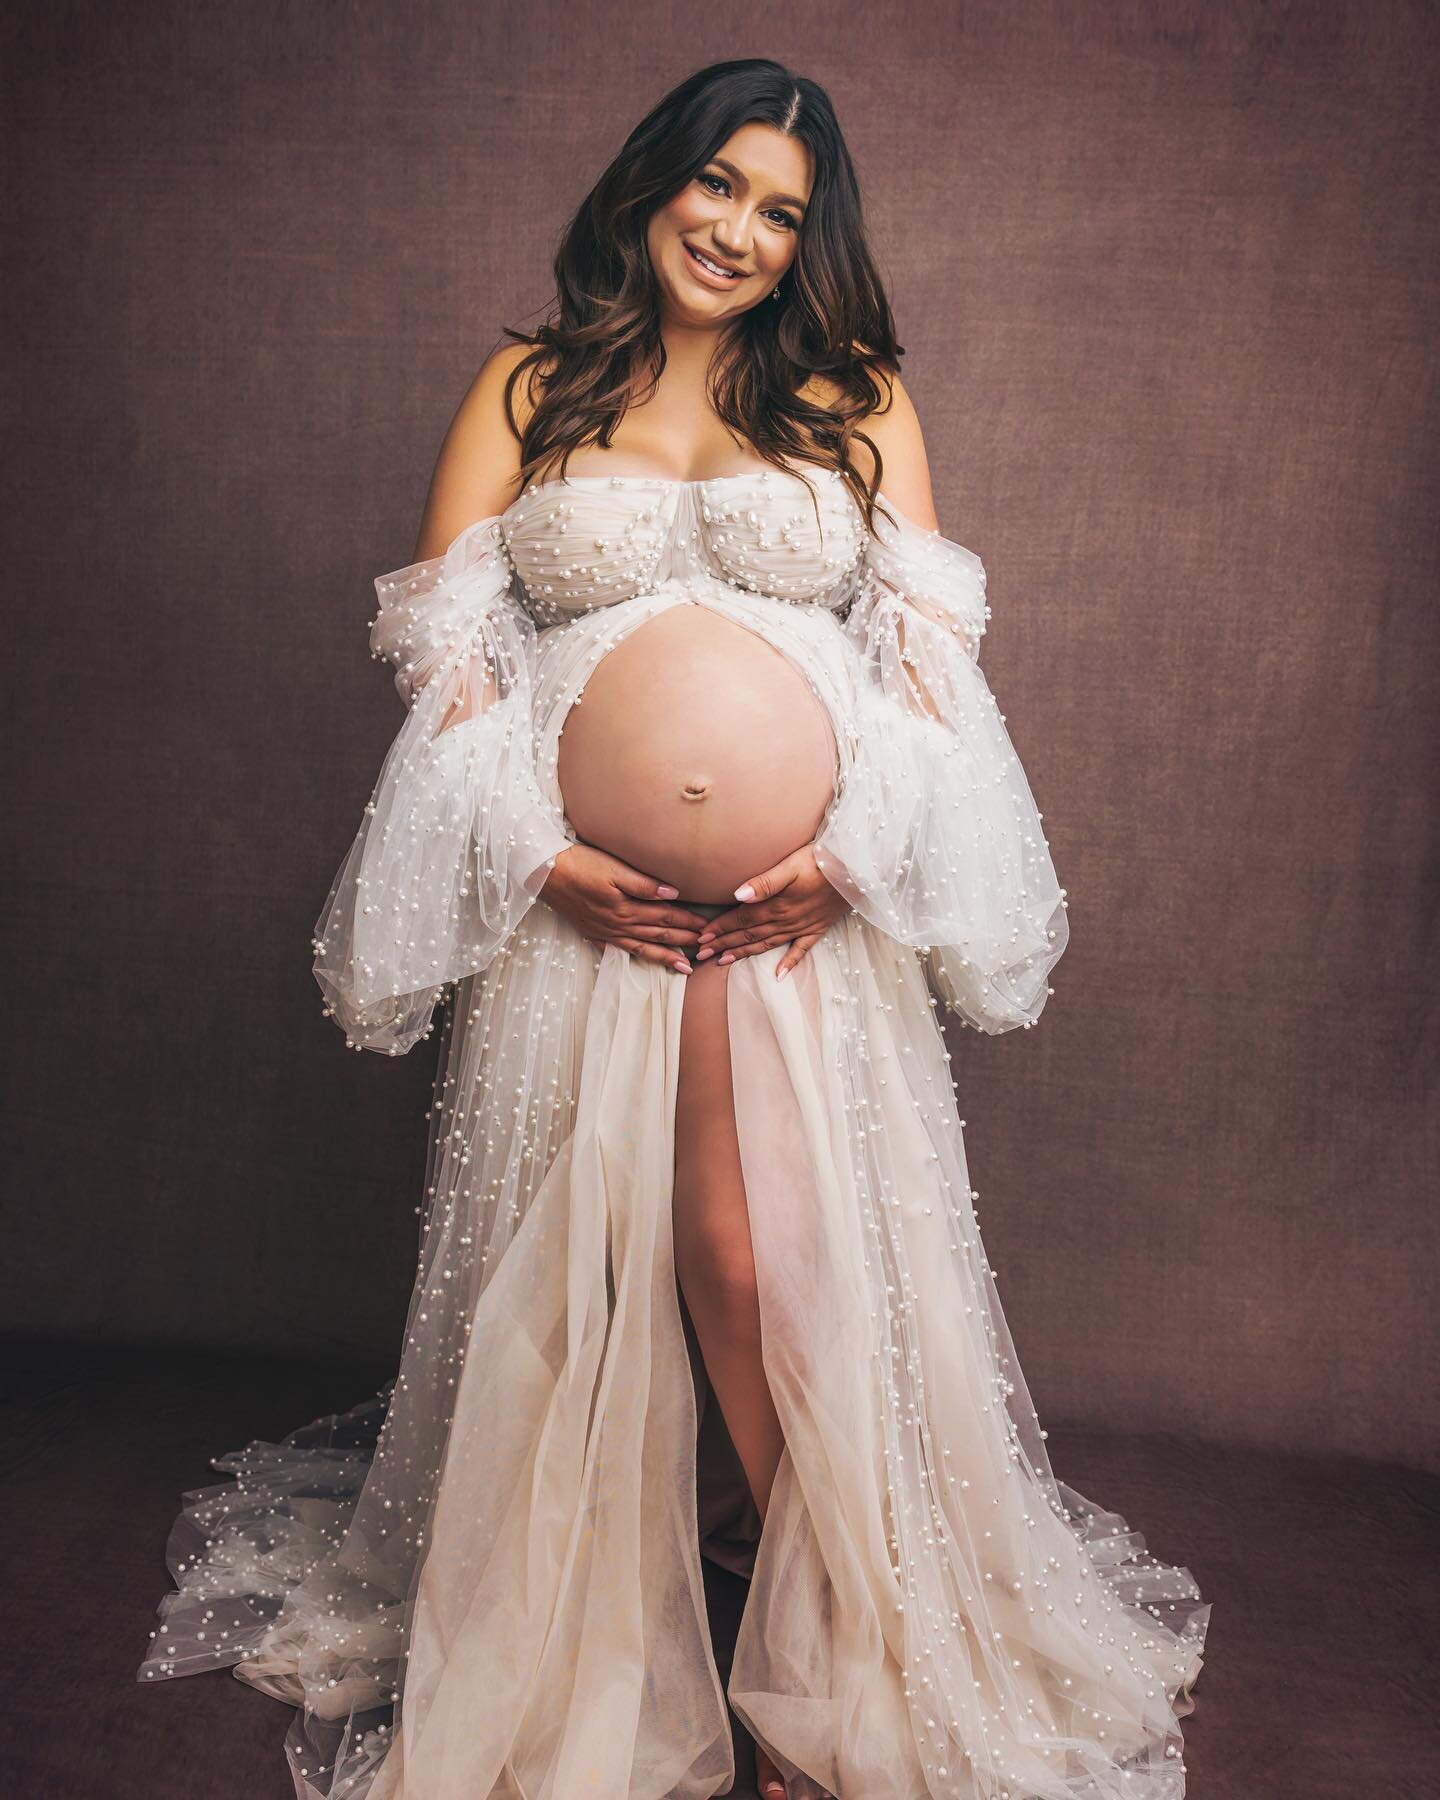 Had an amazing maternity studio photo shoot yesterday. Thank you @saltgowns for this fabulous dress and @lelaruthphotography for the great tips as this was my first try.  The goal will be to provide a limited amount of an in-home studio experience fo